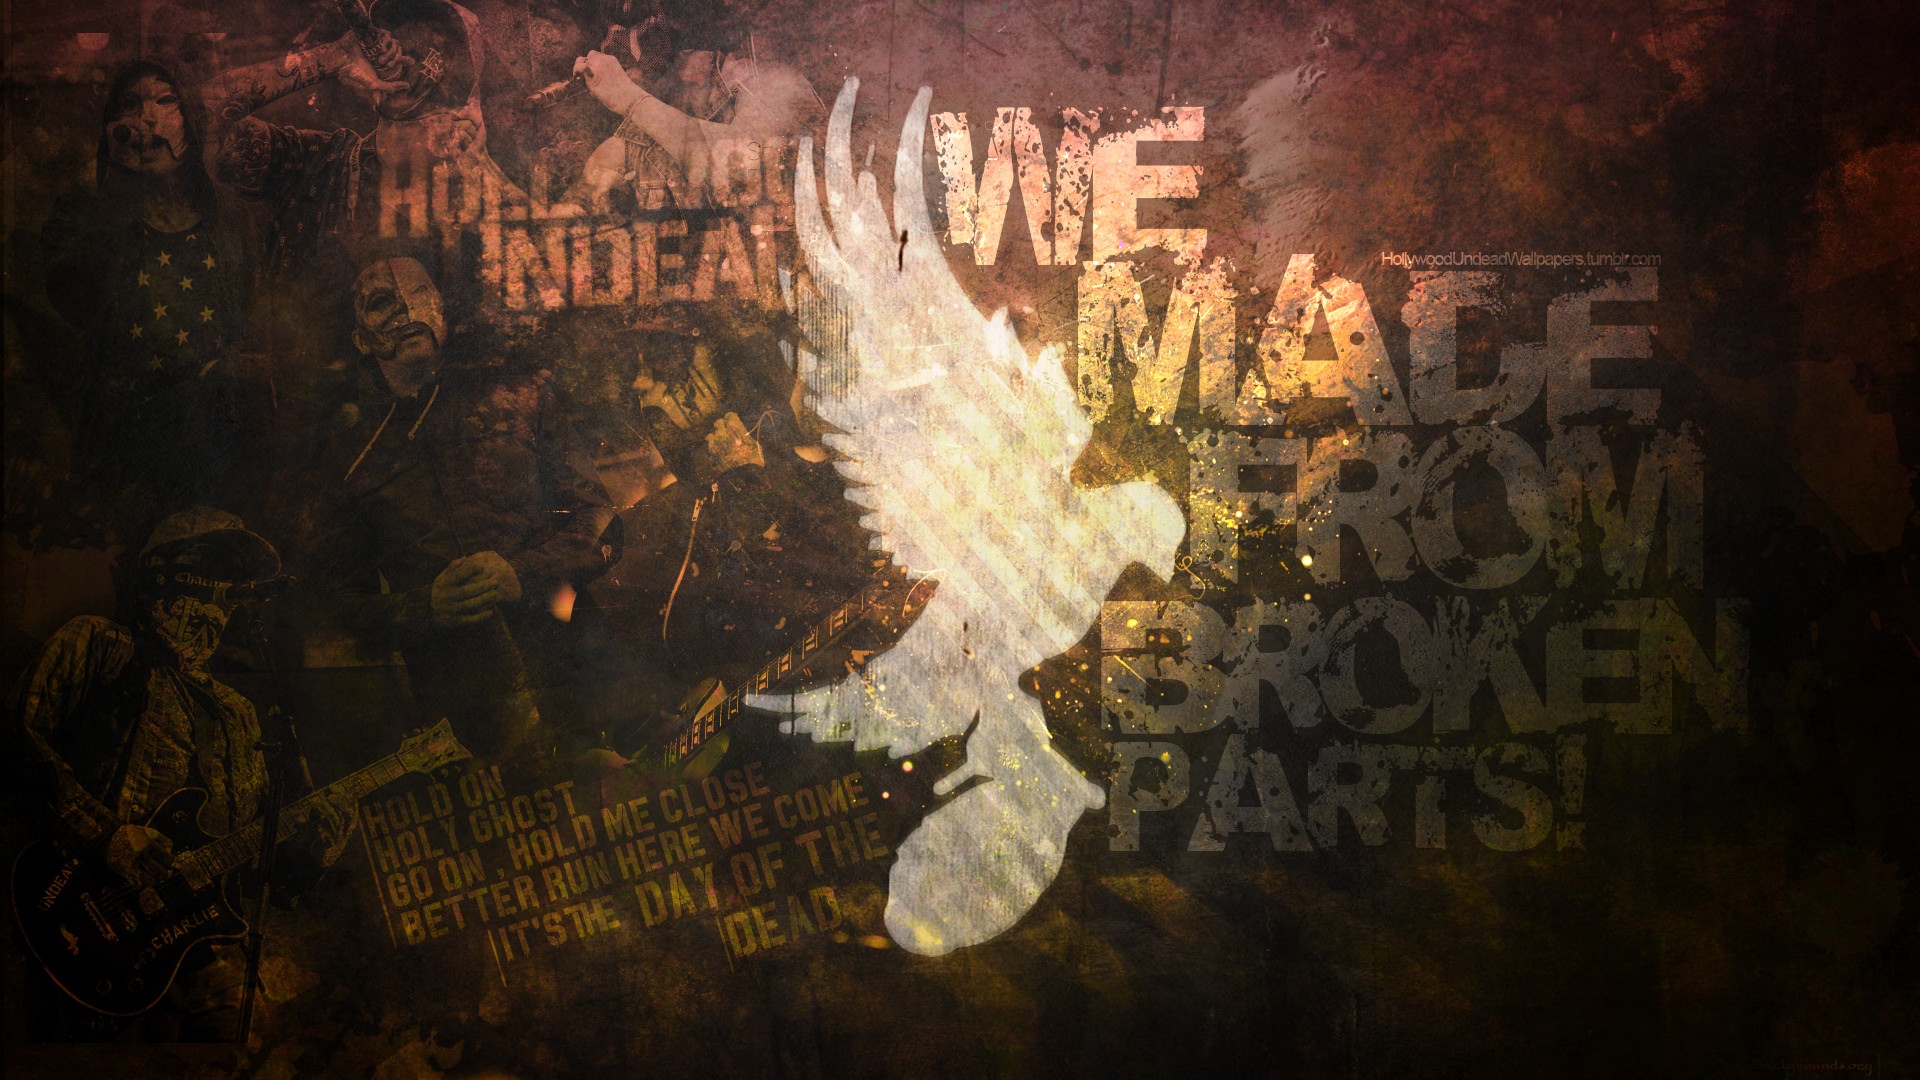 Hollywood Undead – Dove and Grenade Wallpaper by emirulug